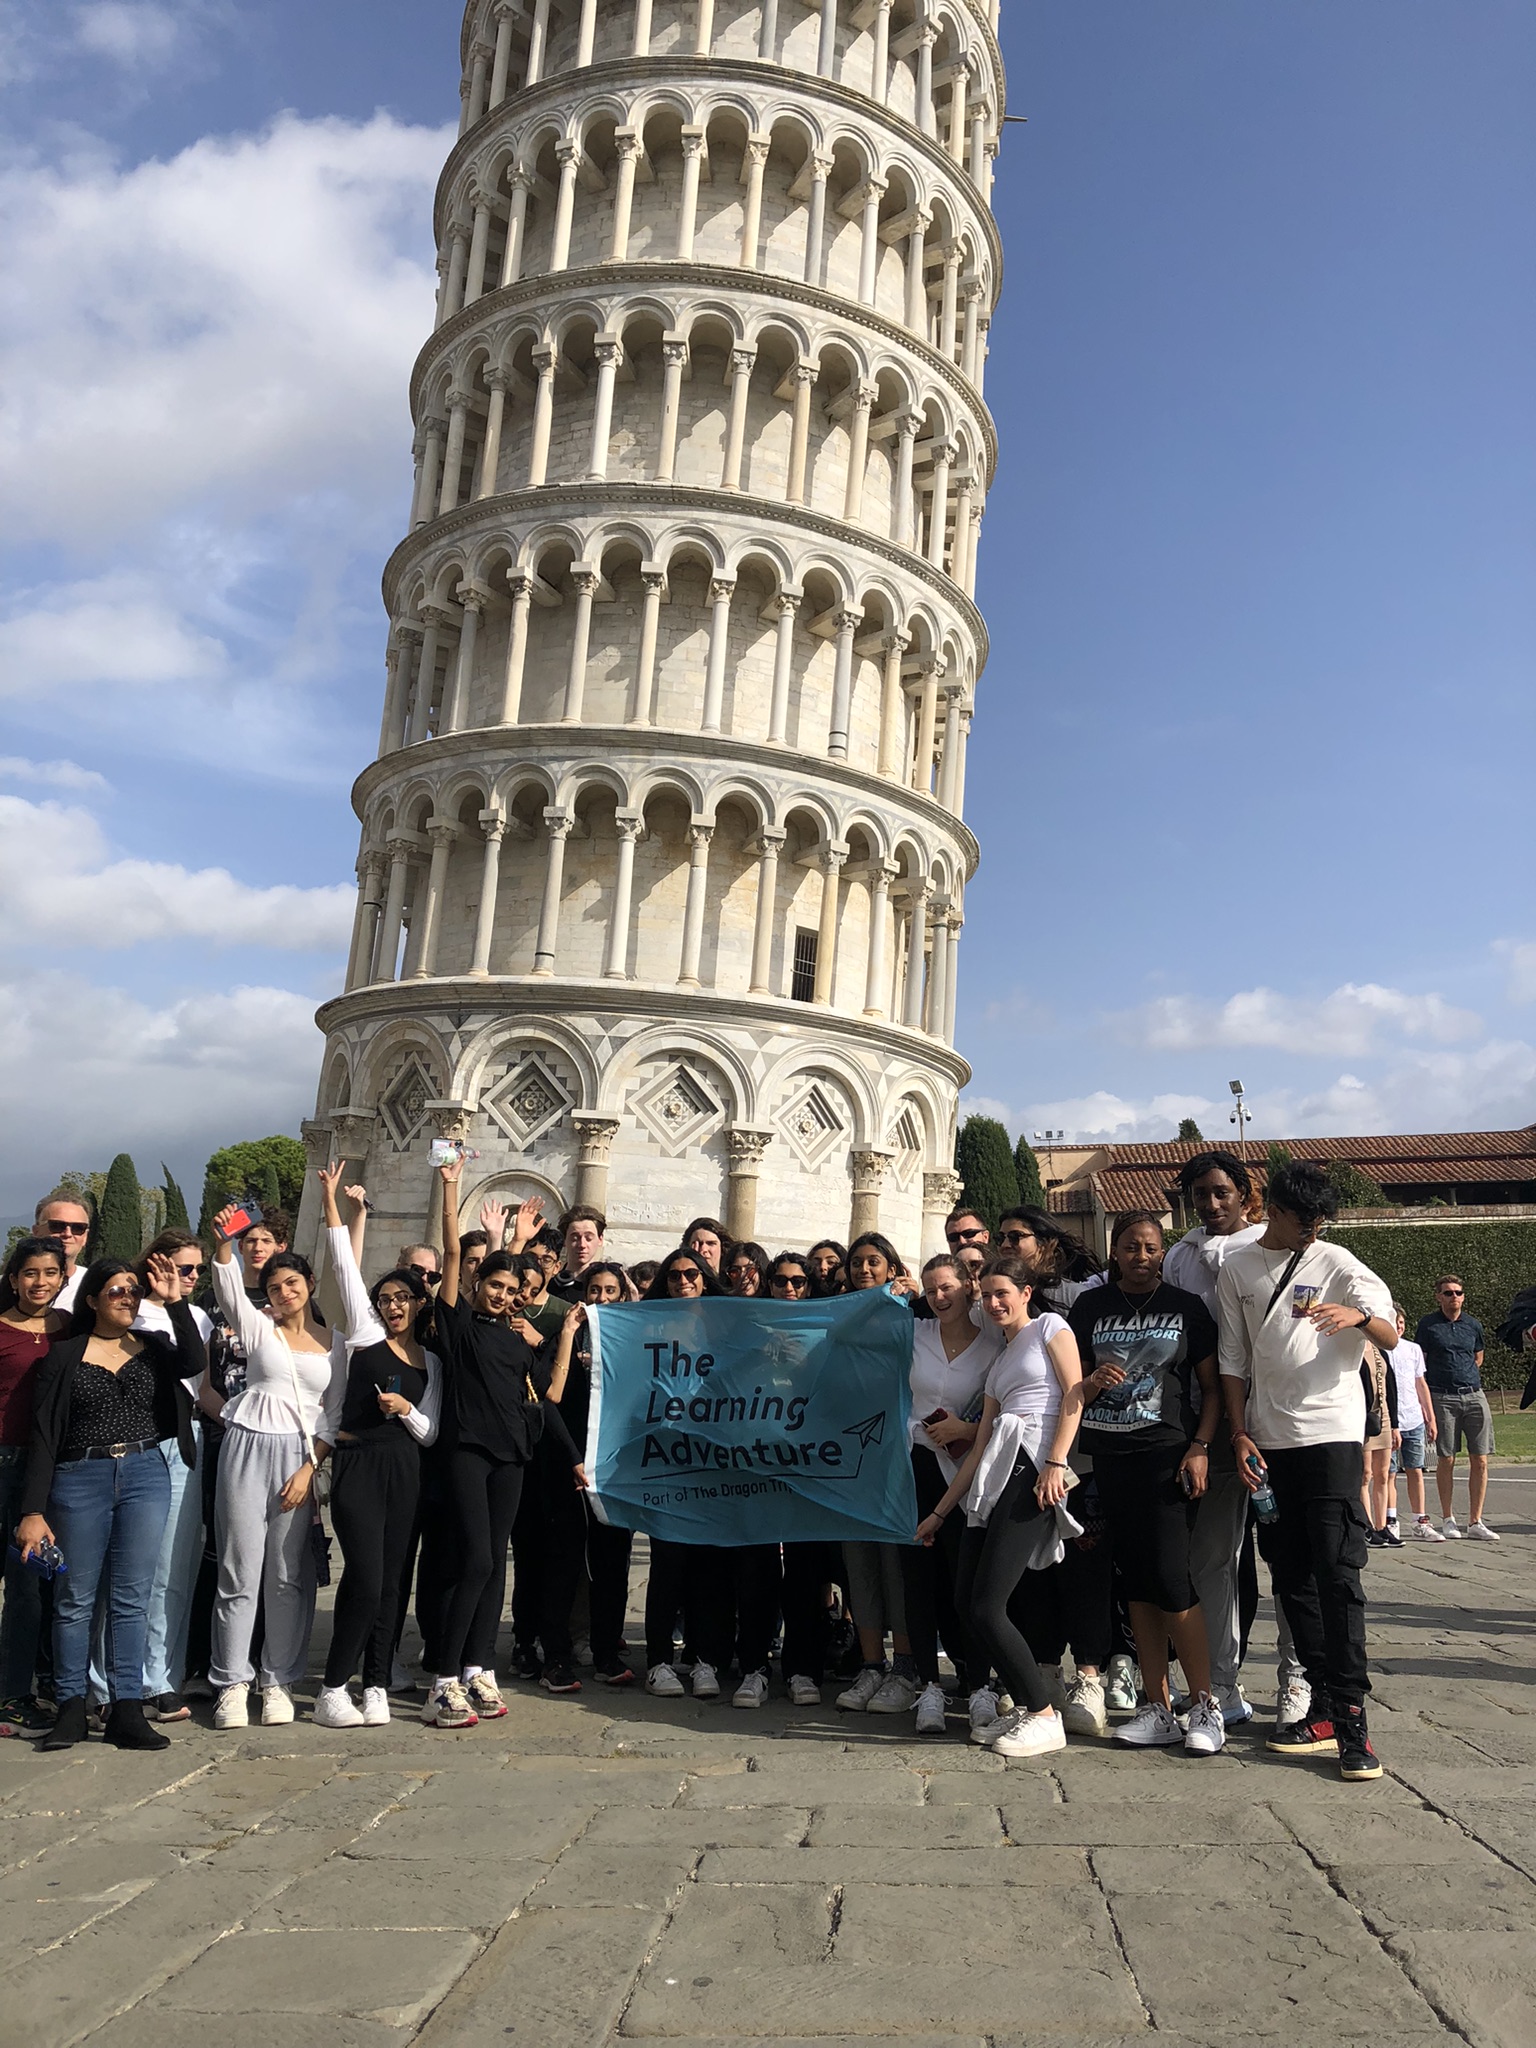 The Renaissance Italy tour with The Learning Adventure